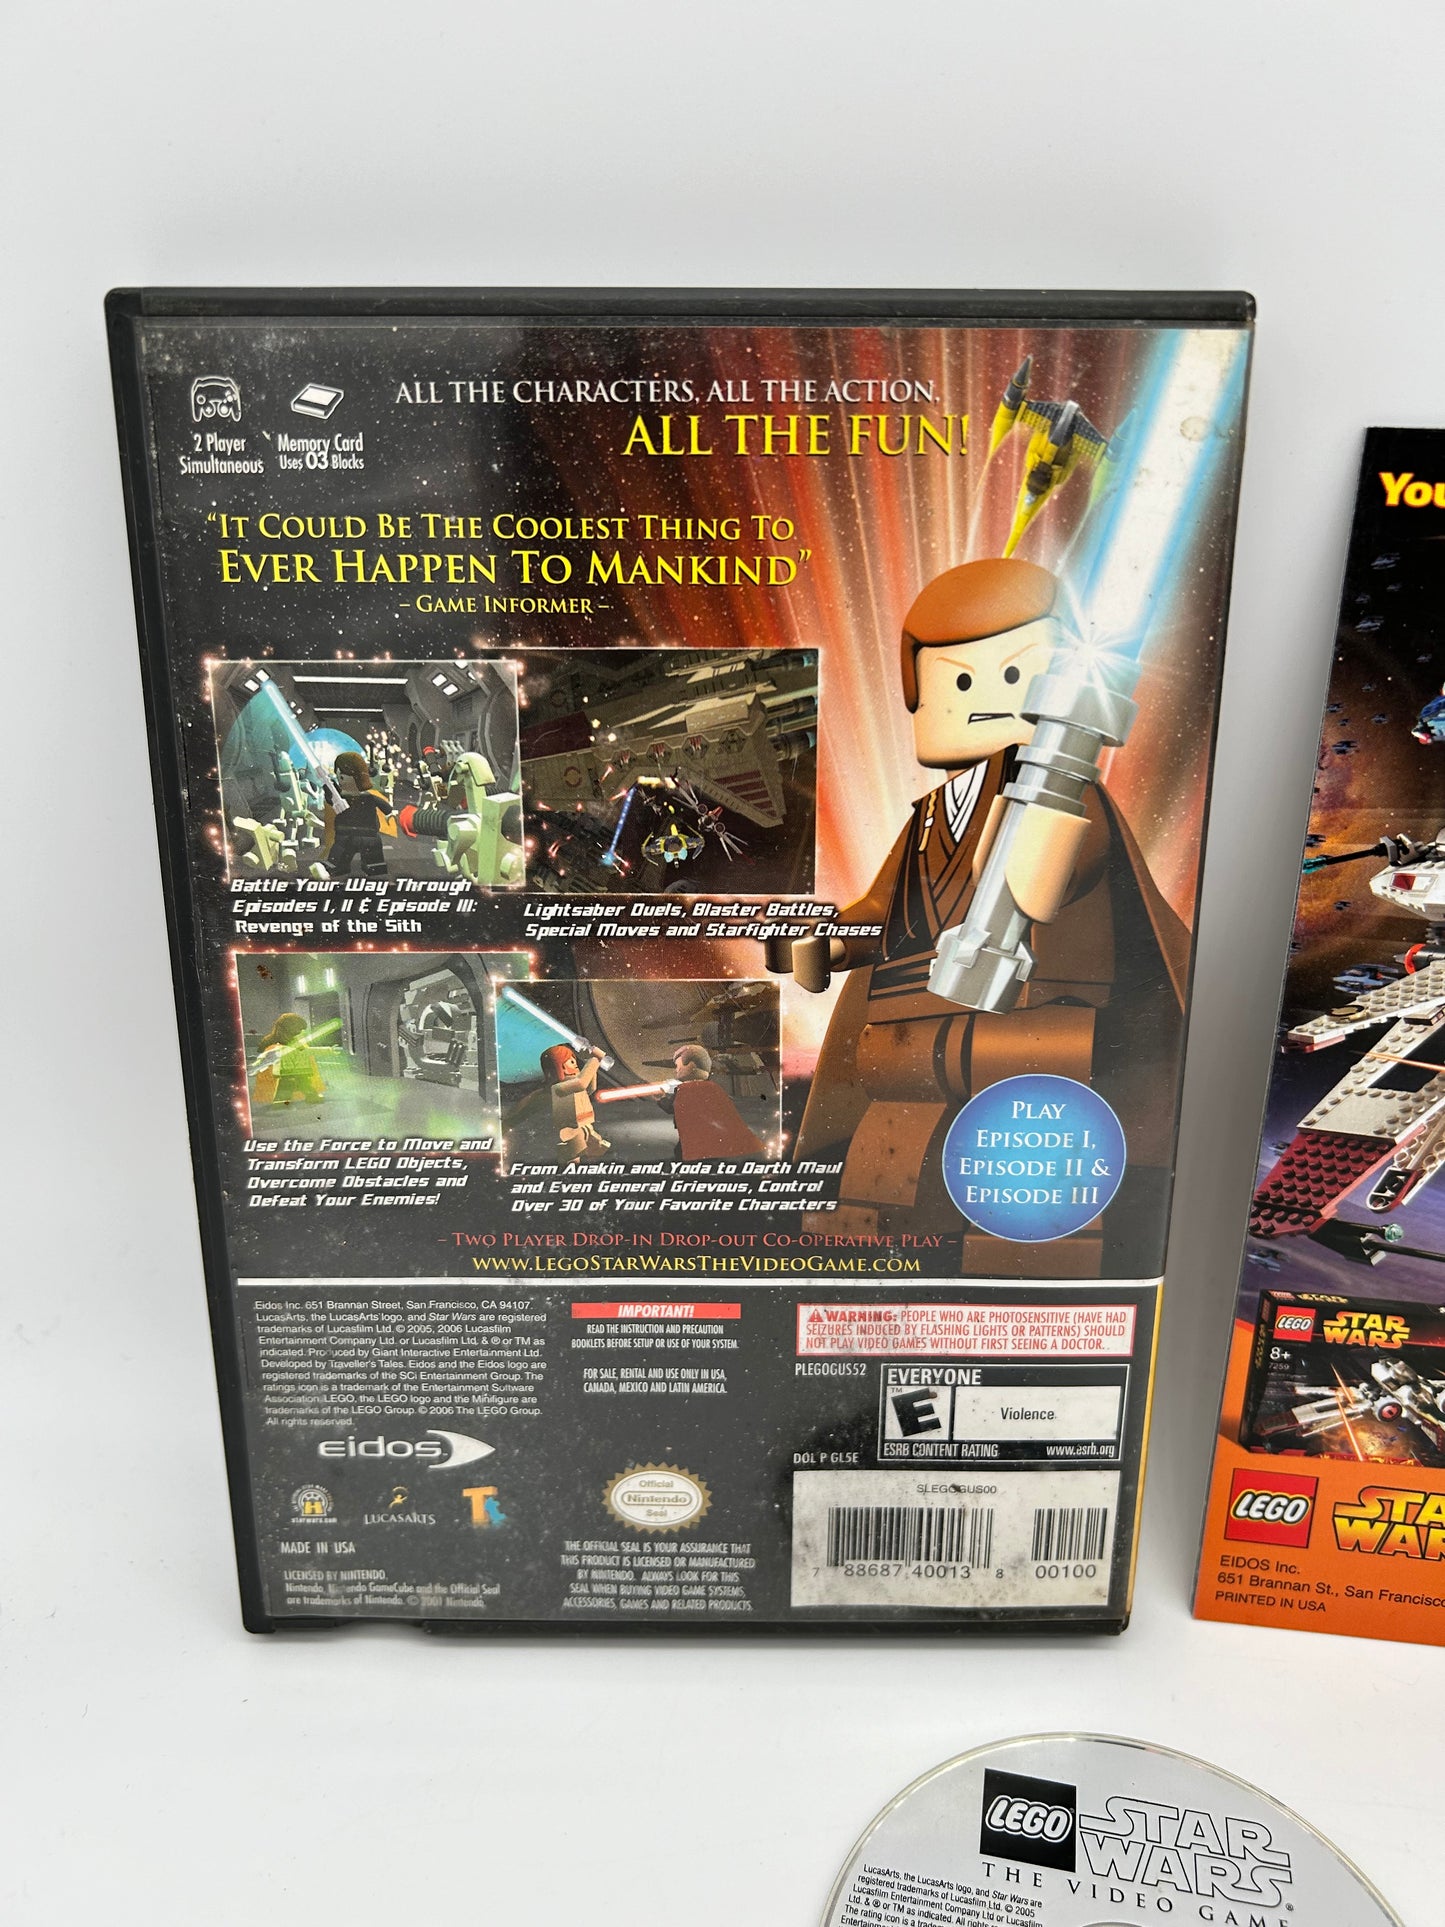 NiNTENDO GAMECUBE [NGC] | LEGO STAR WARS THE VIDEO GAME | PLAYERS CHOiCE